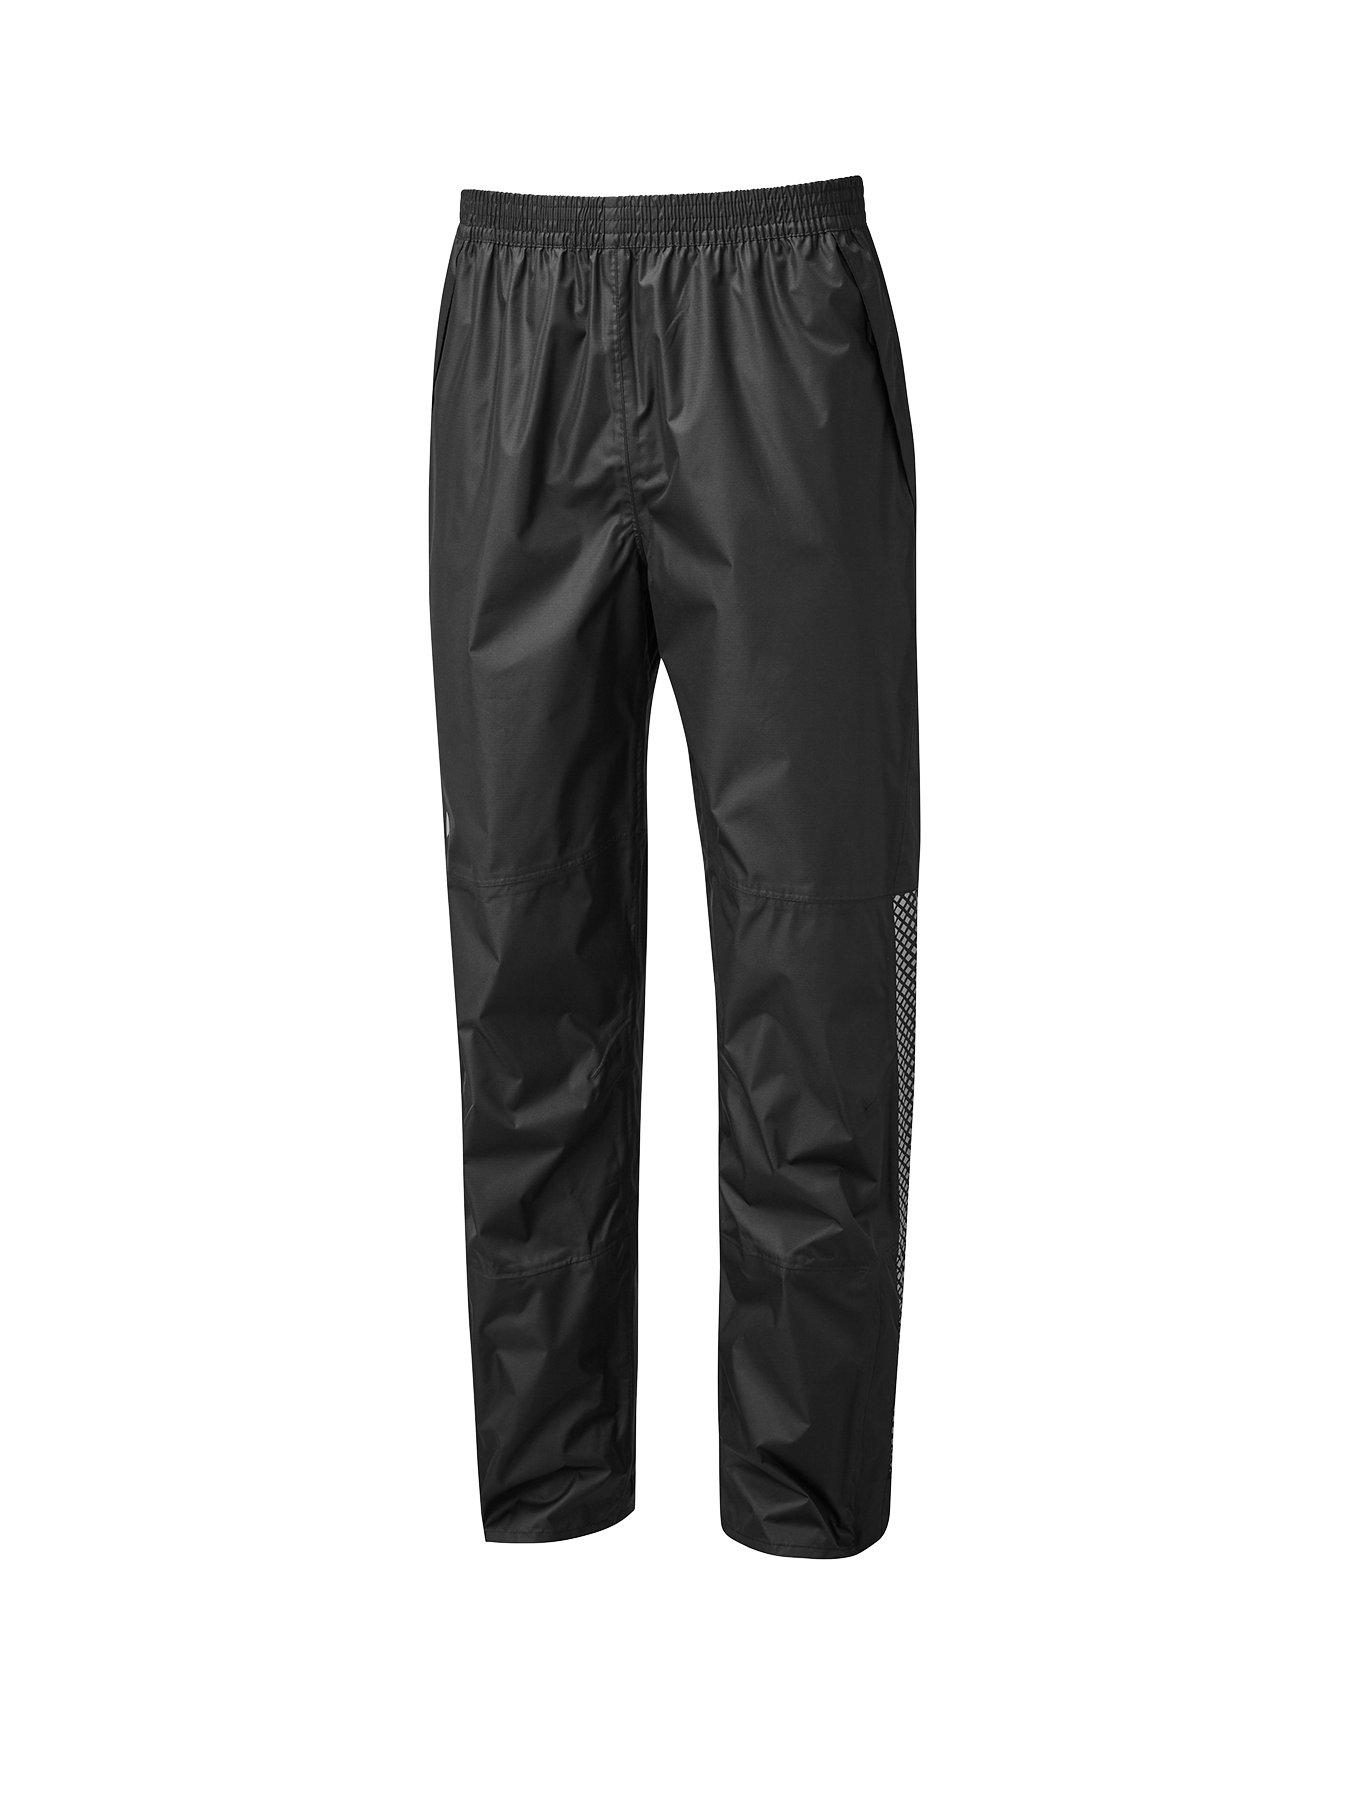 Men Cycling Nightvision Mens Over Trouser - Black